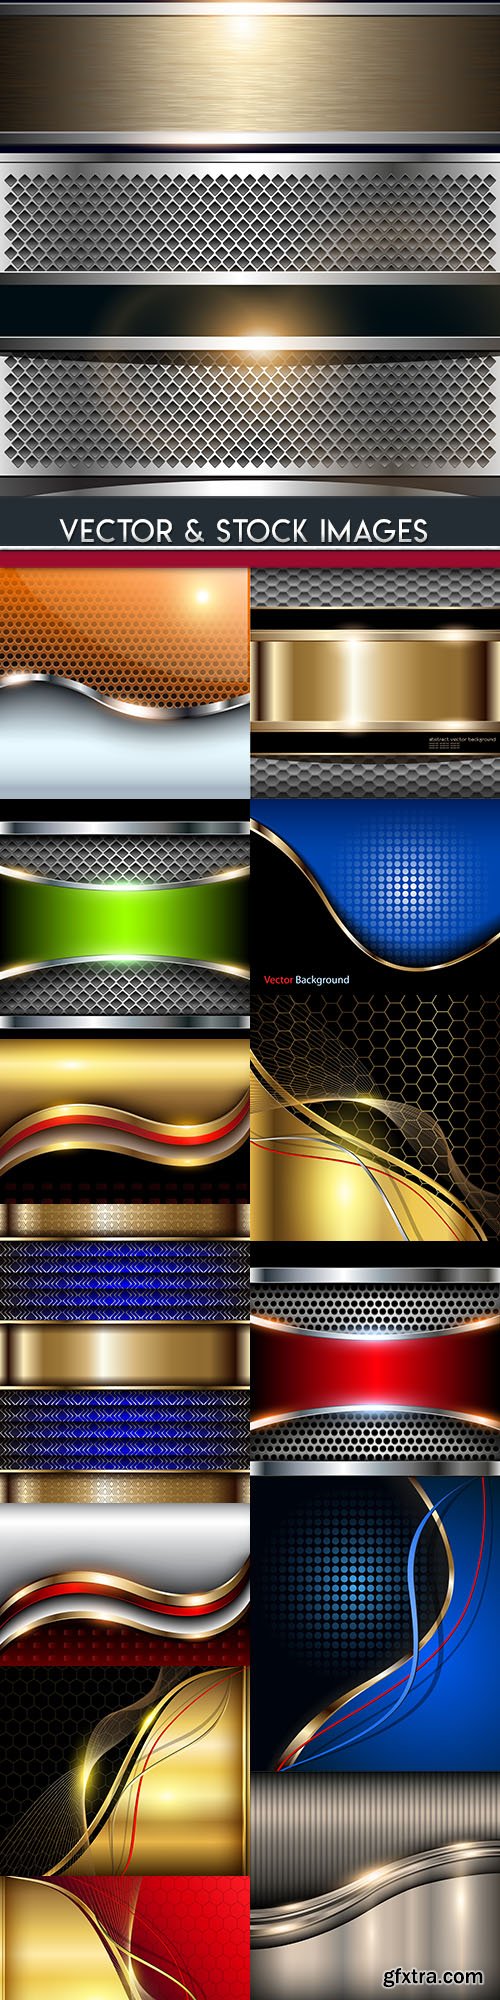 Elegant metallic and gold lines abstract background